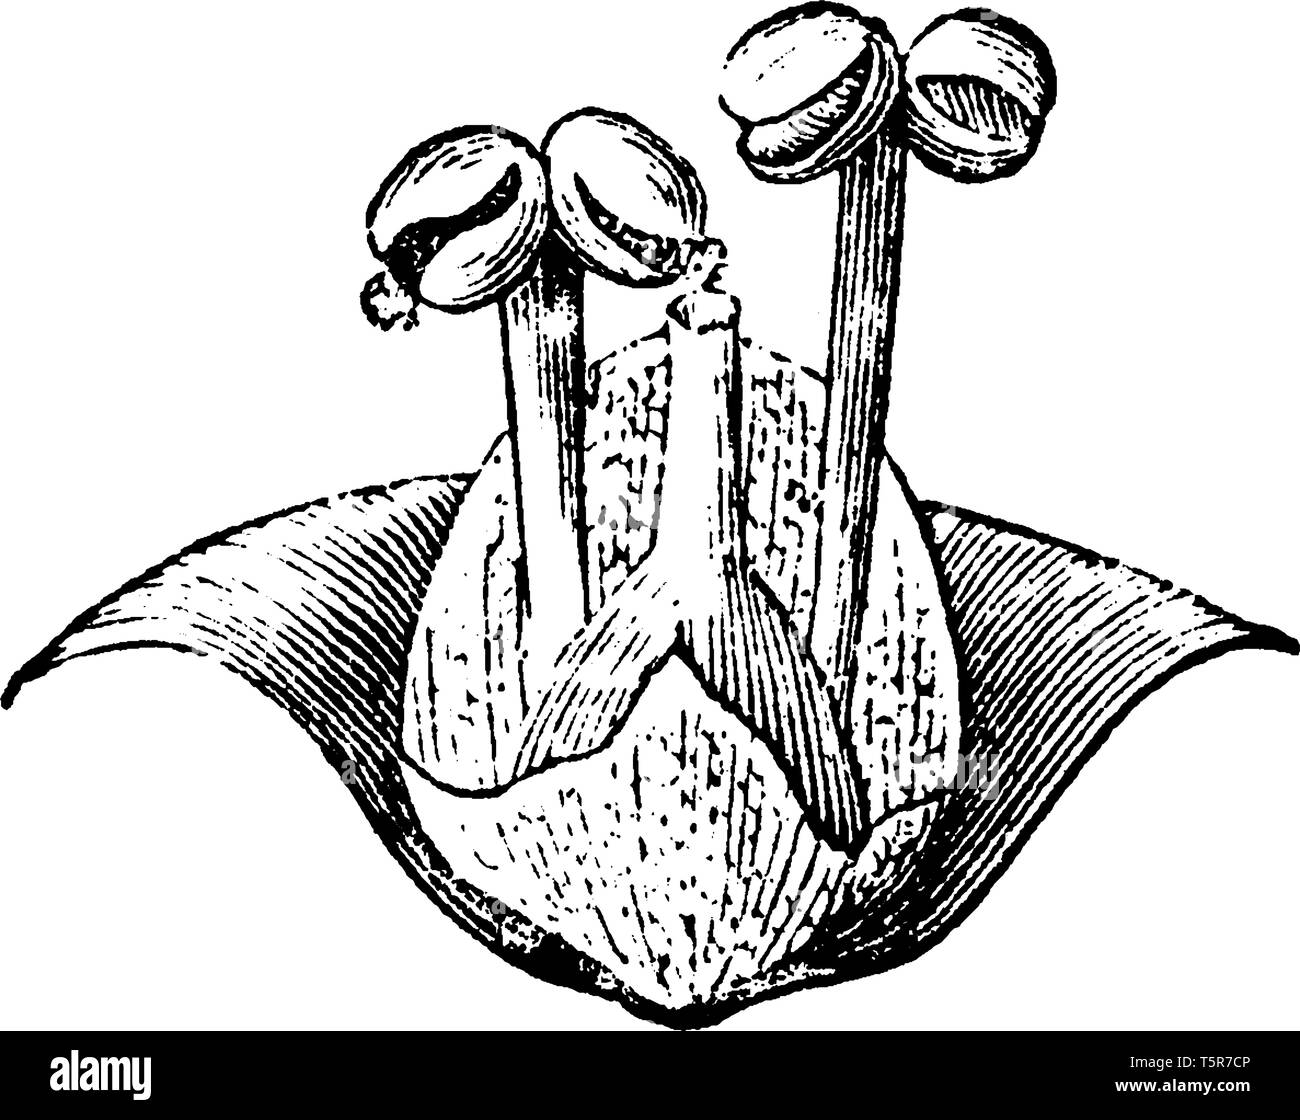 Lemnaoideae is aquatic plant. This is a flowering plant. The image showing pistil, part of the stamens and one fruit, vintage line drawing or engravin Stock Vector